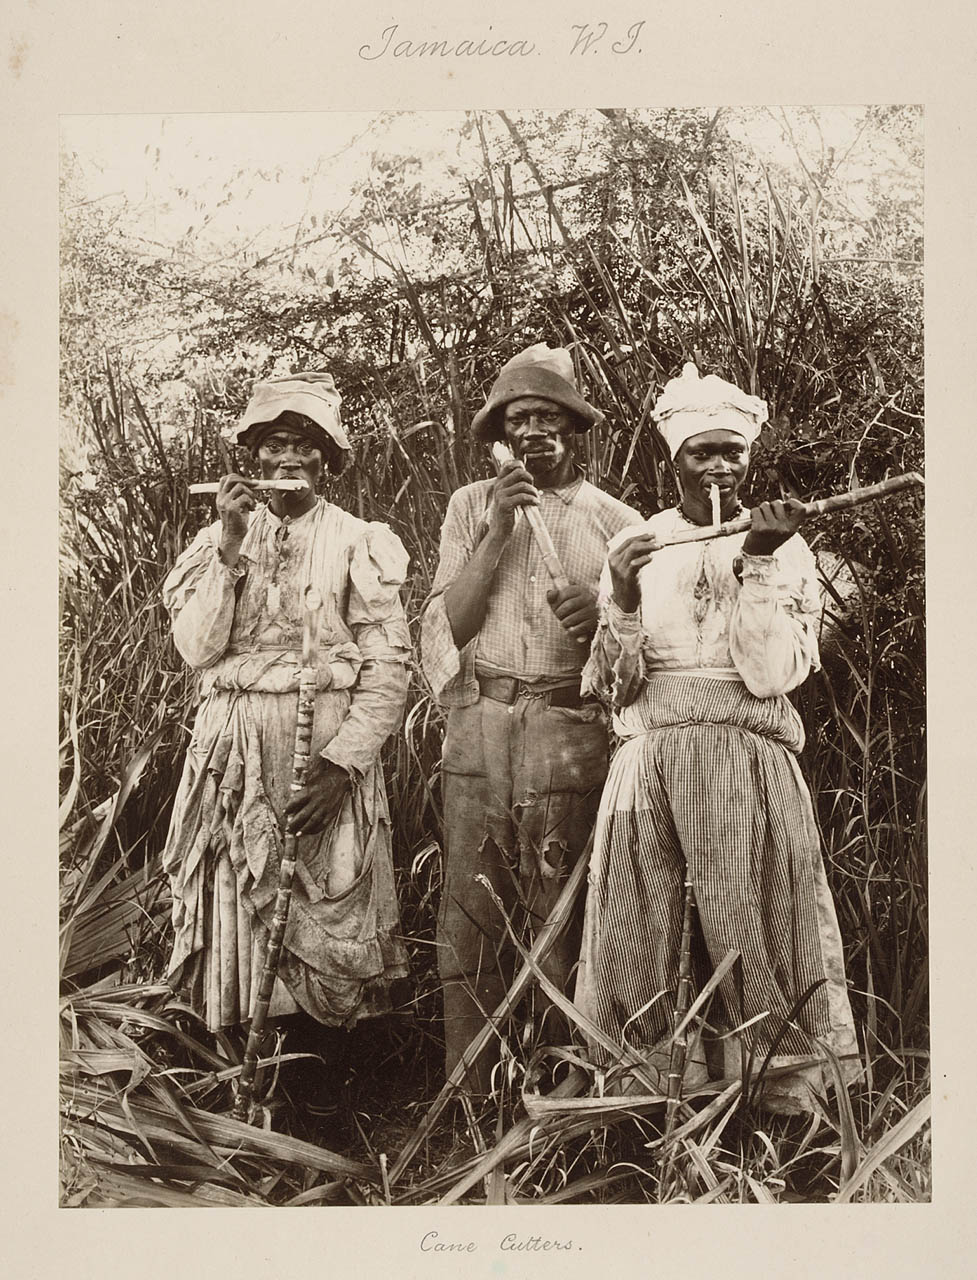 Jamaican cane cutters, mid 1800s after emancipation